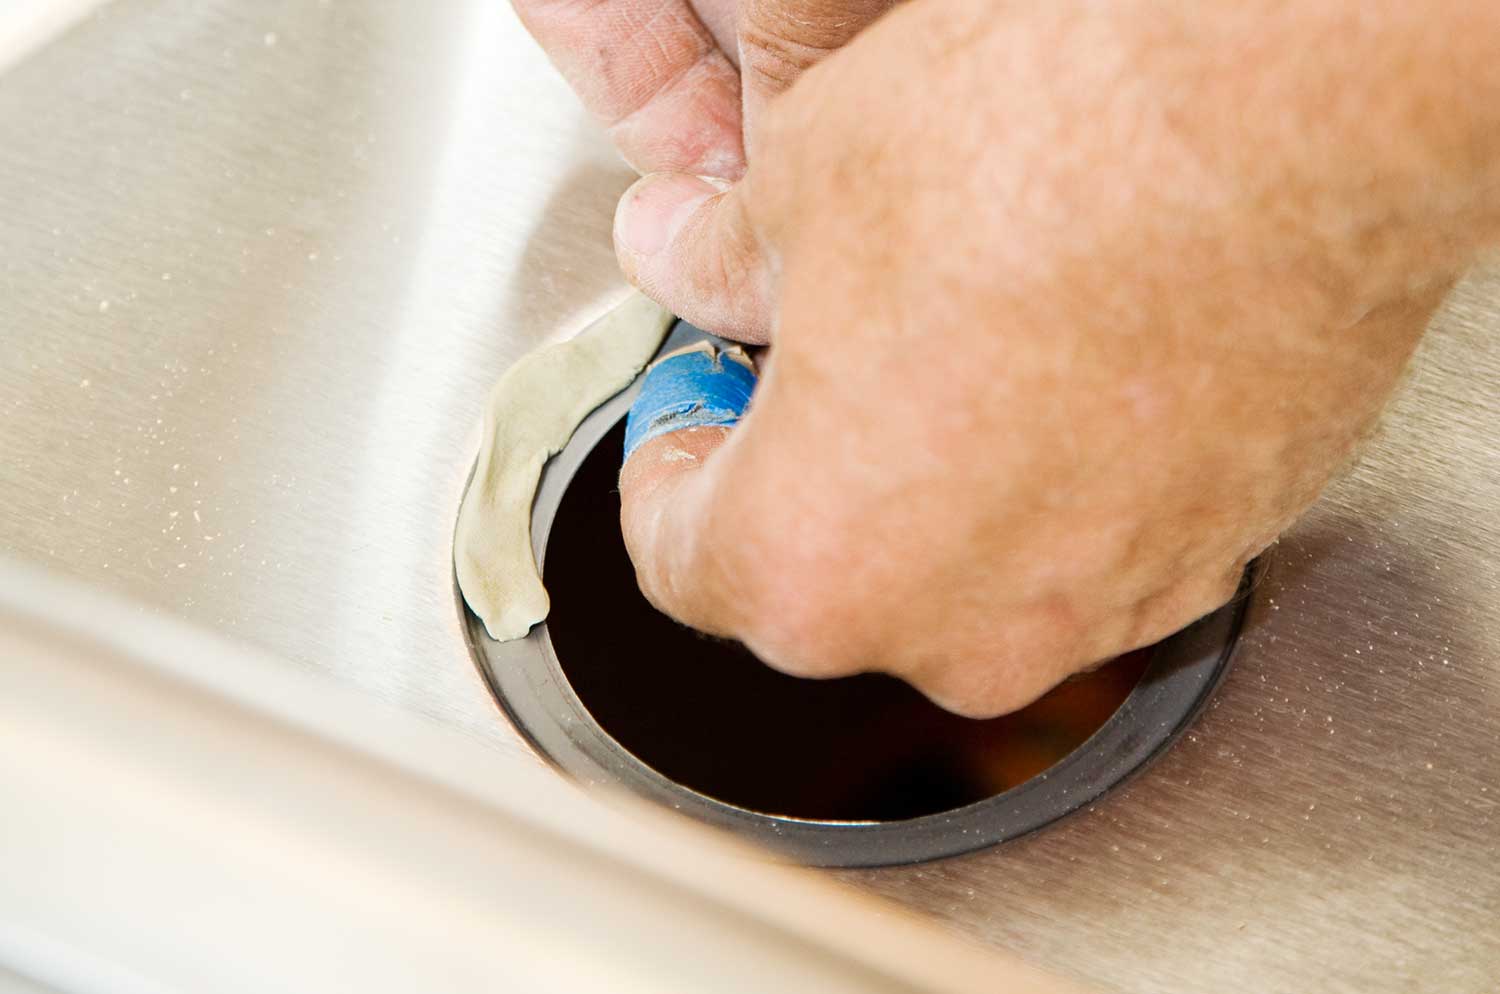 Closeup of a plumbers hands applying plumbing putty to sink drain